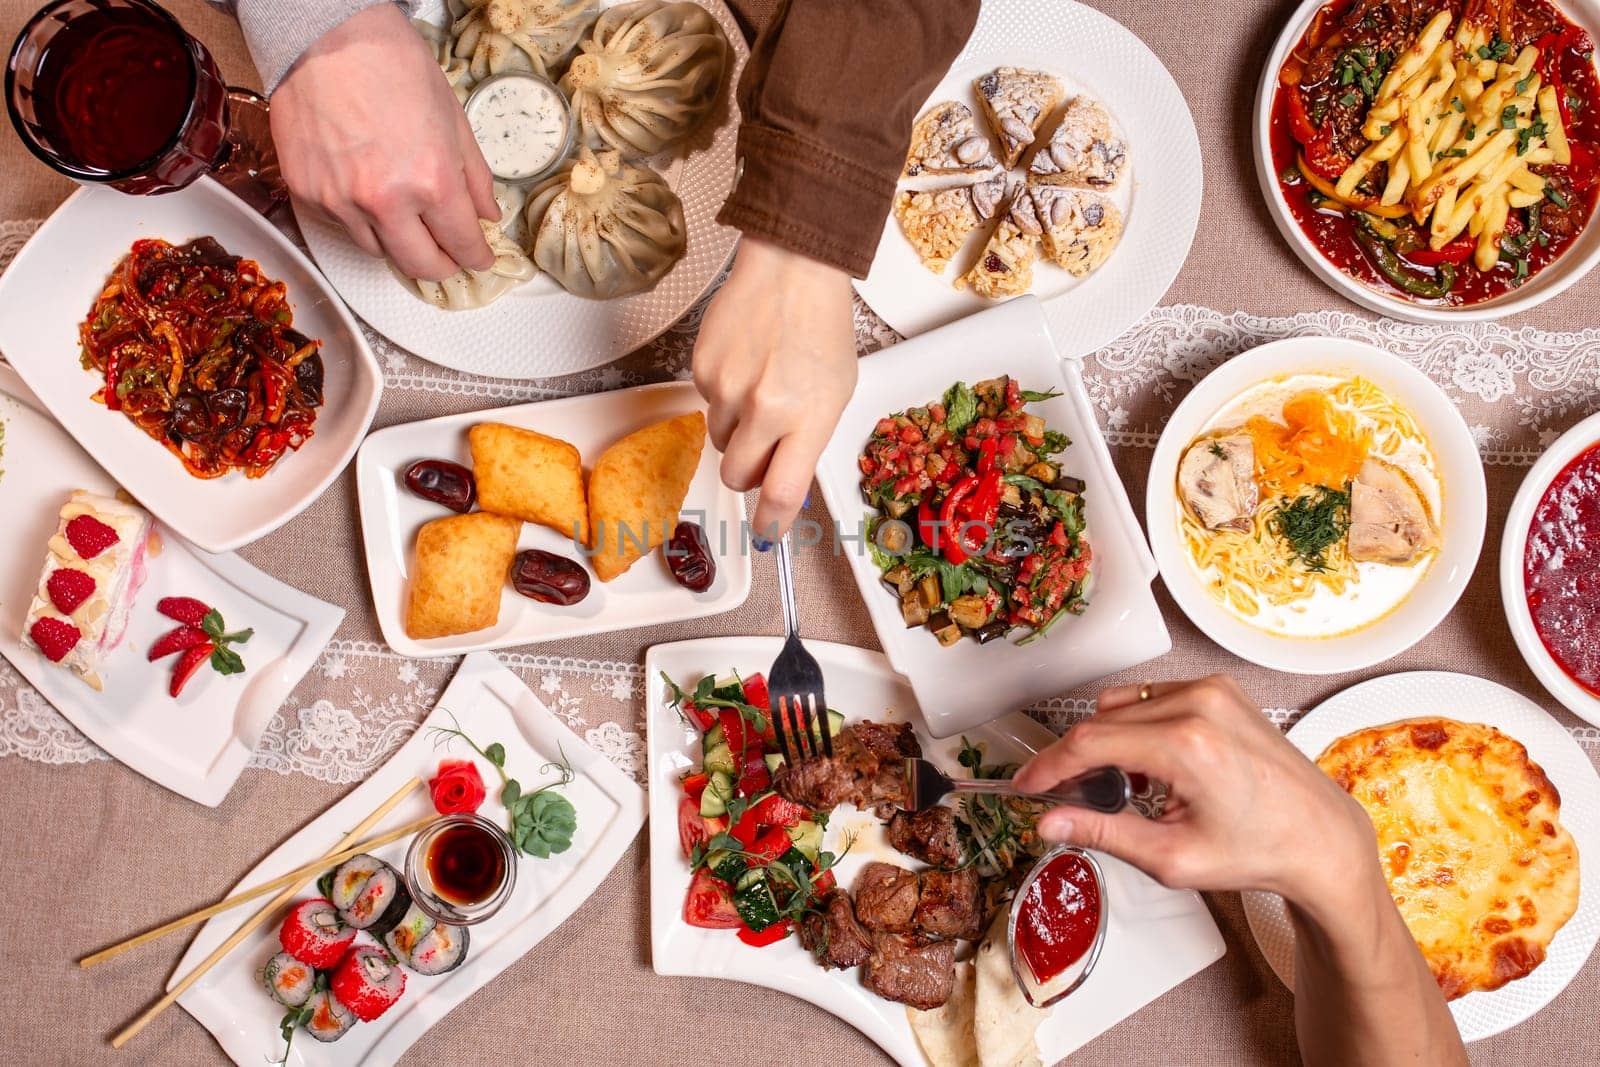 top view of the different dishes on the table. hands reaching for food by Pukhovskiy